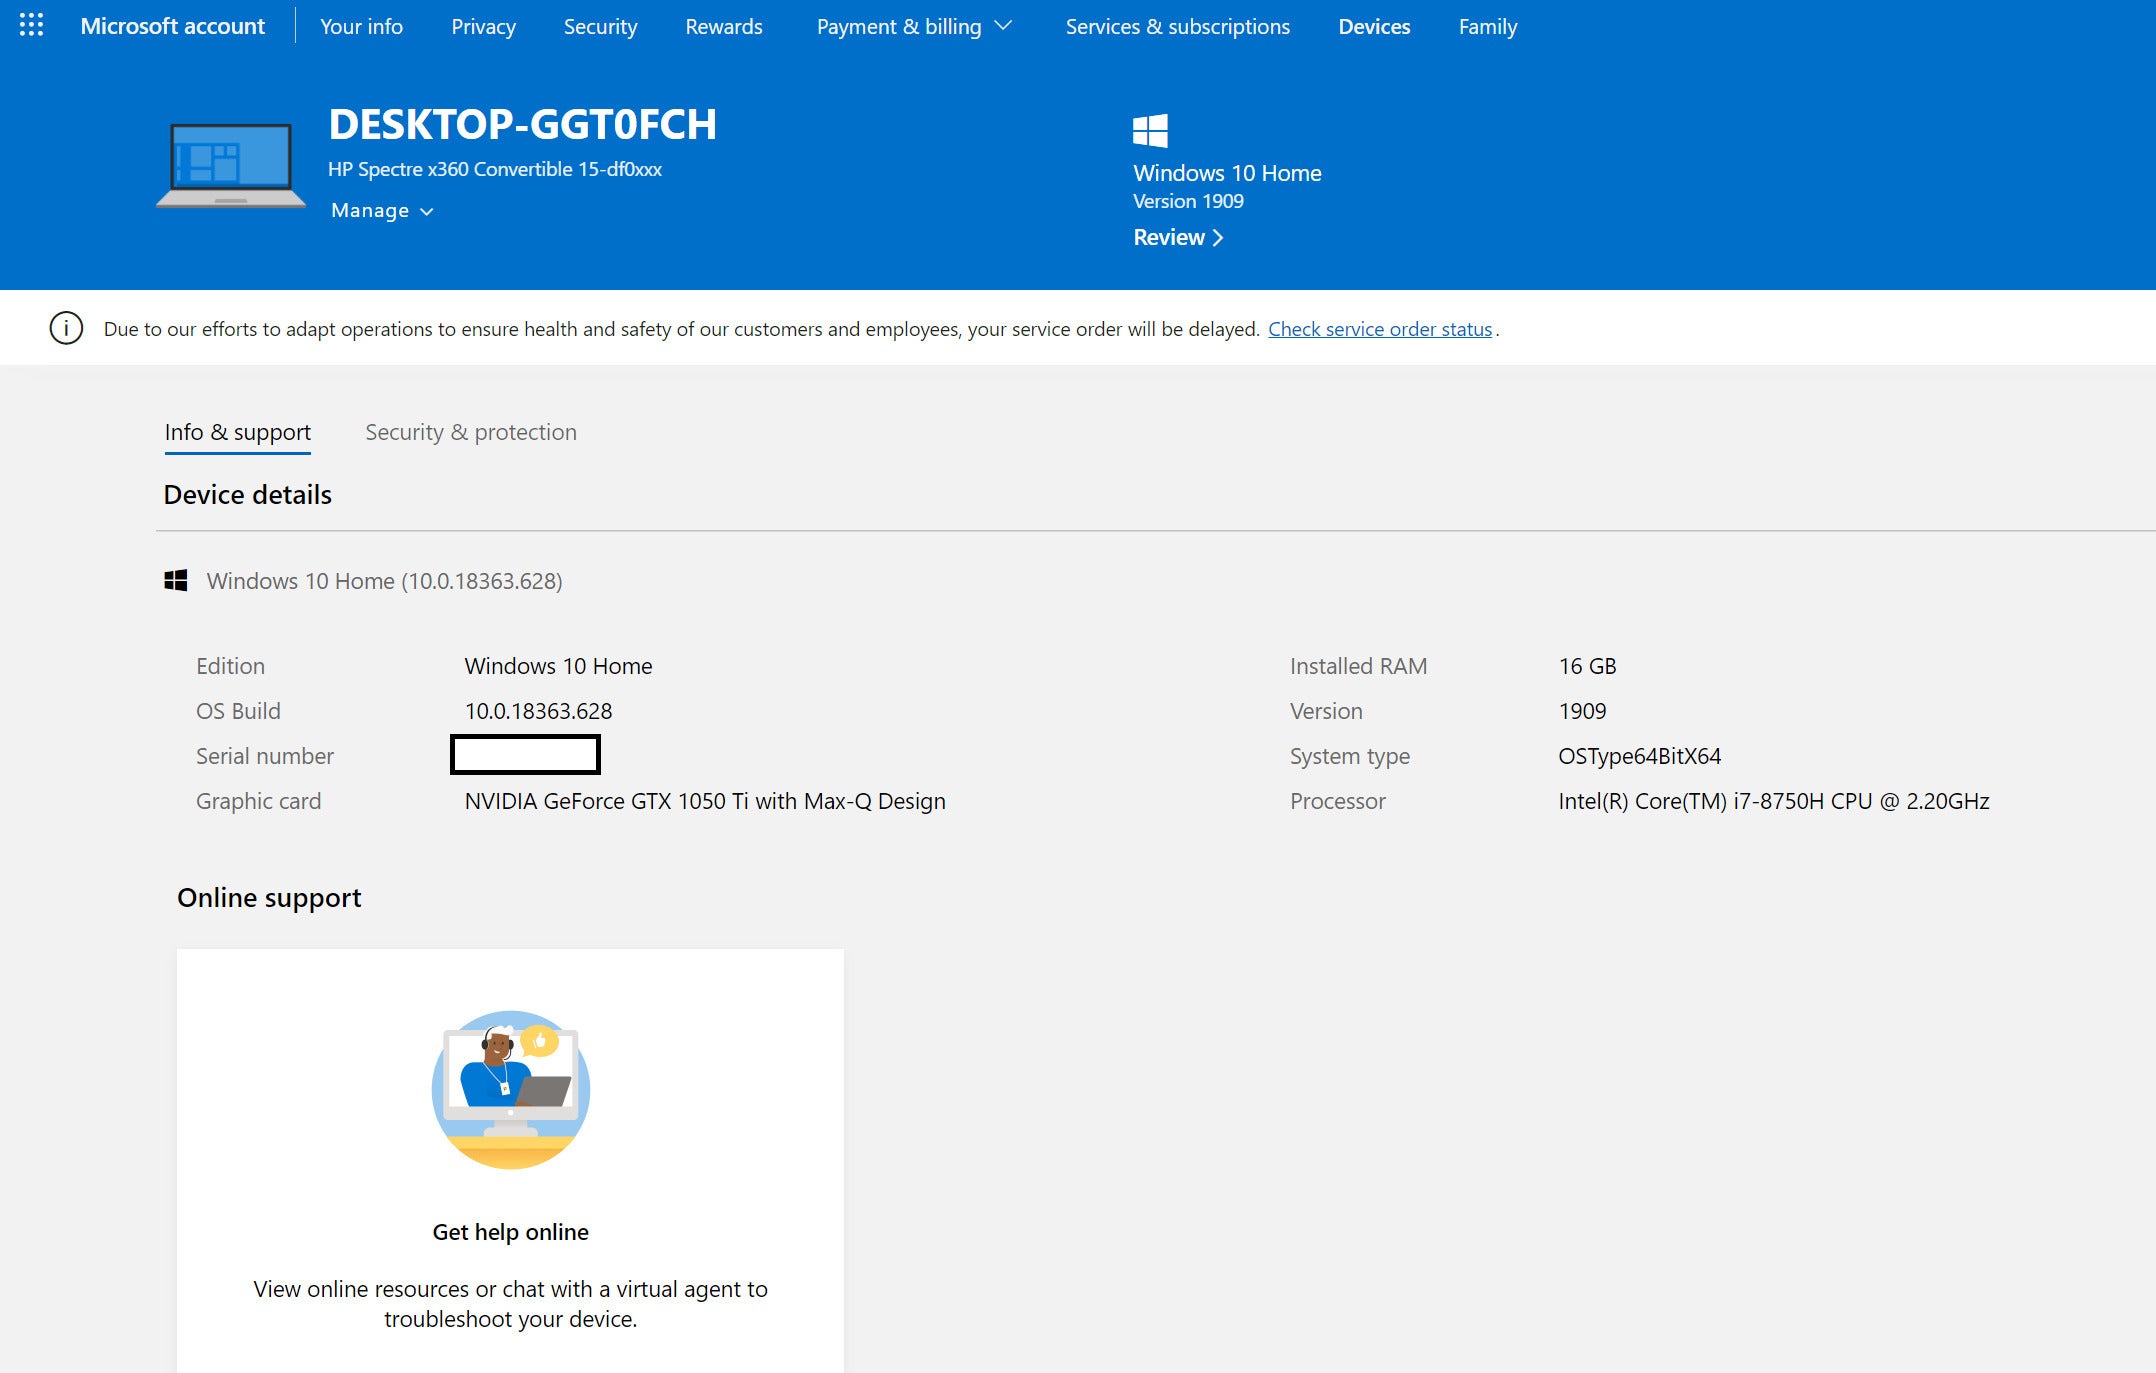 how to change my device name in microsoft live account